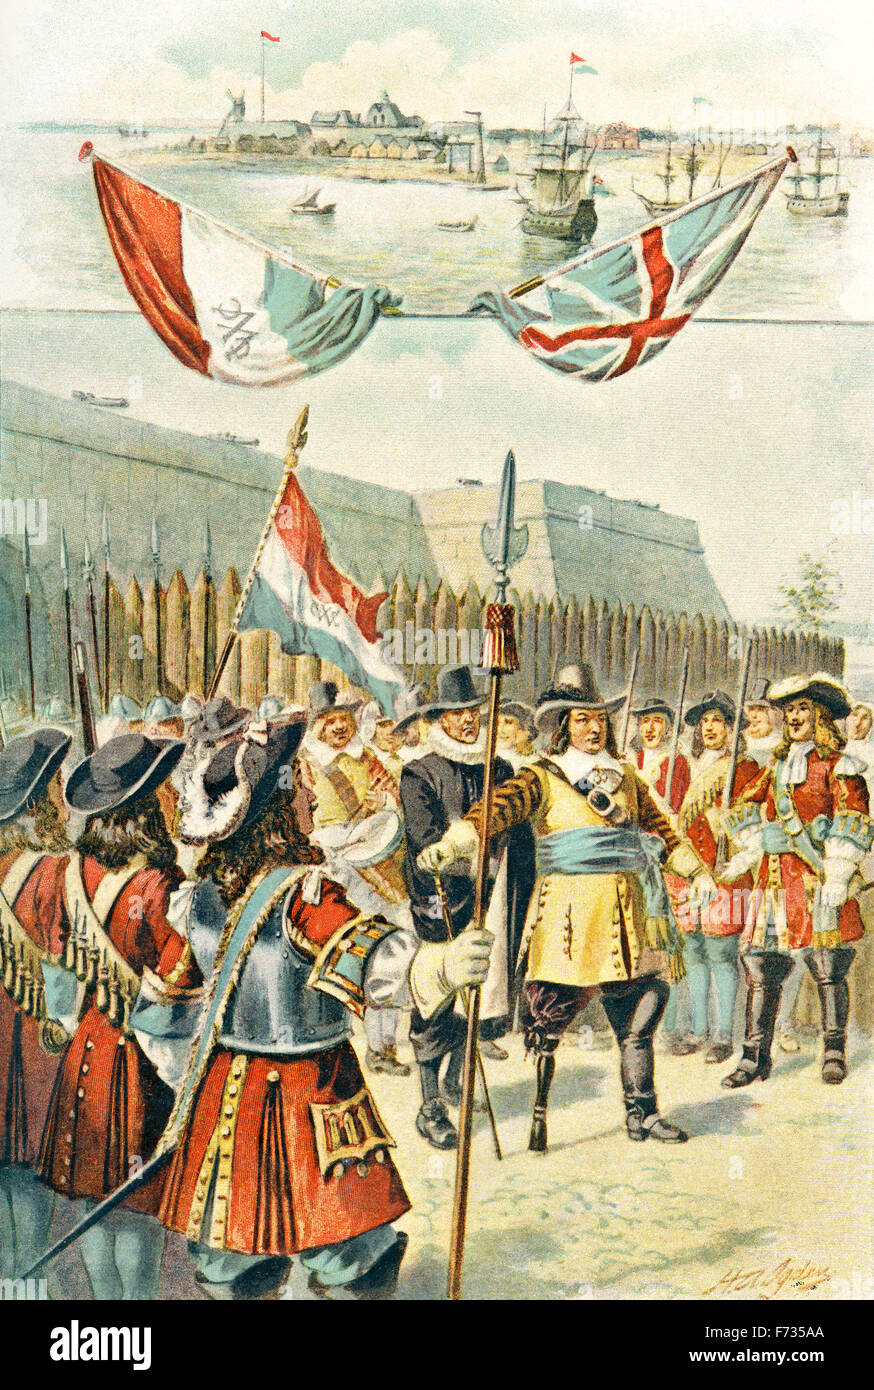 The Dutch surrender New Amsterdam, America, to the English, September 8th, 1664. Stock Photo